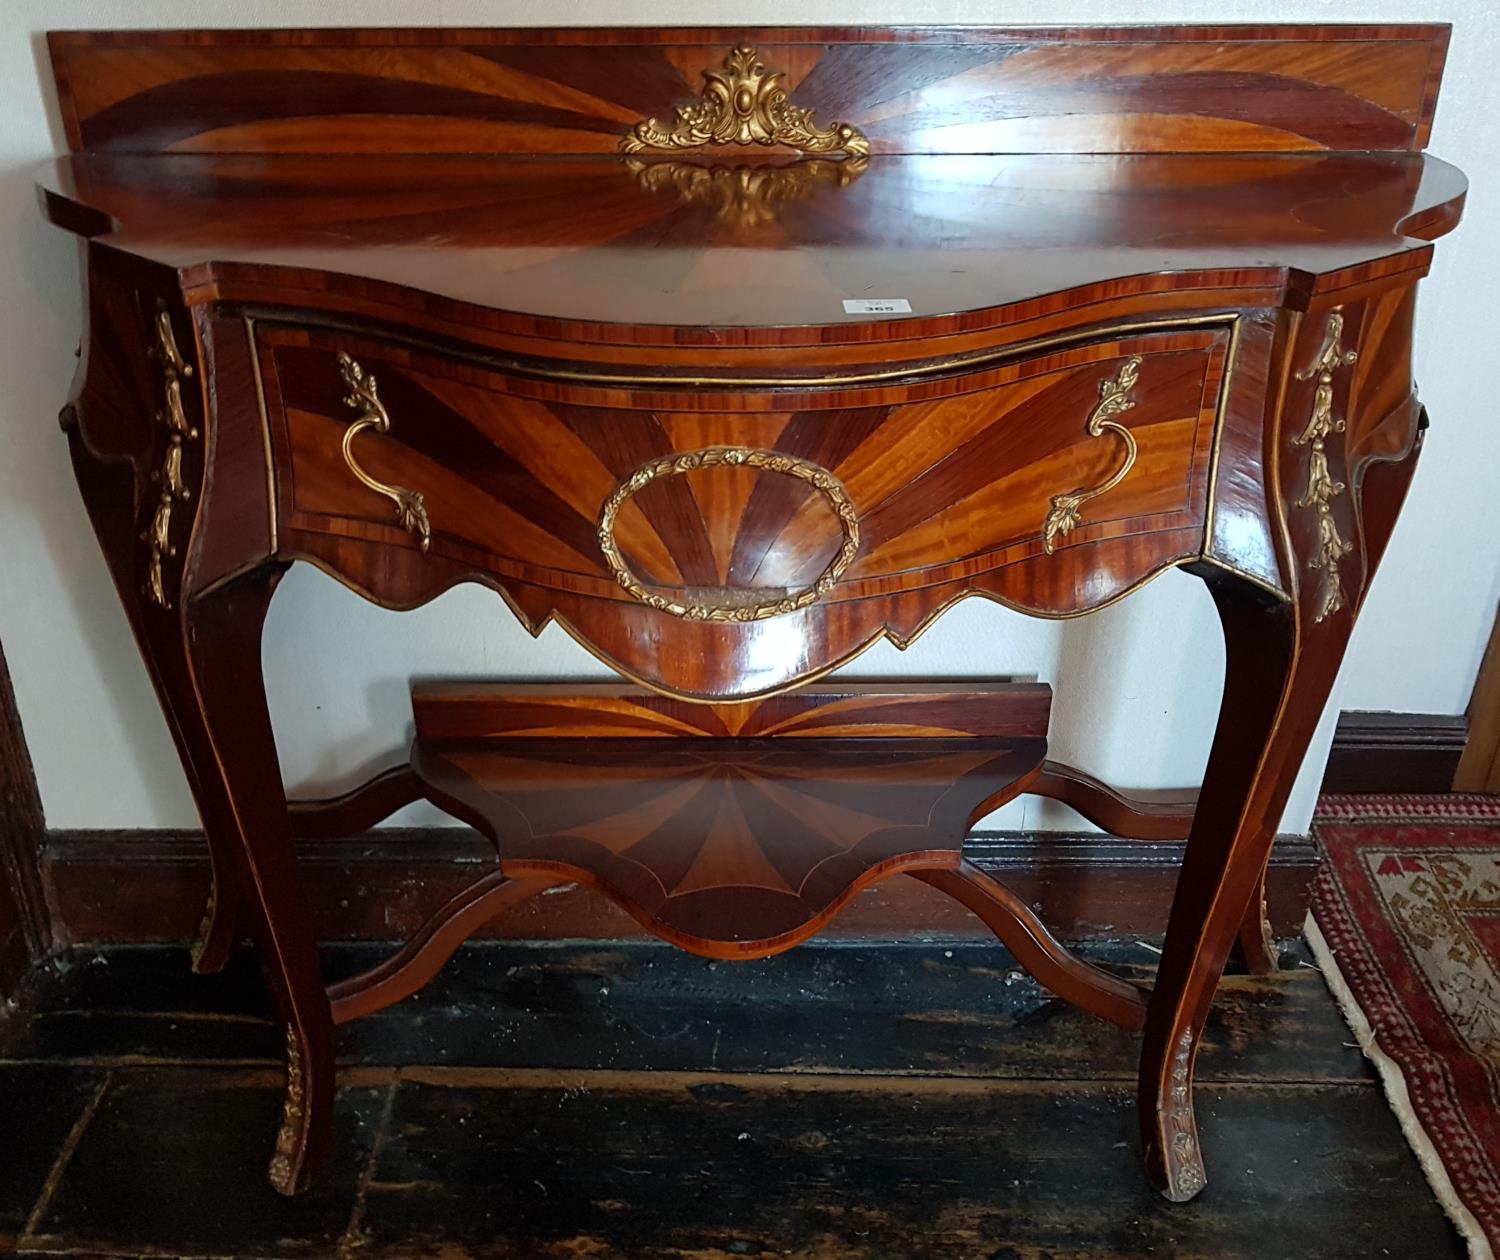 A fantastic Mahogany, Rosewood and Satinwood Continental Side Table with ormolu mounts.